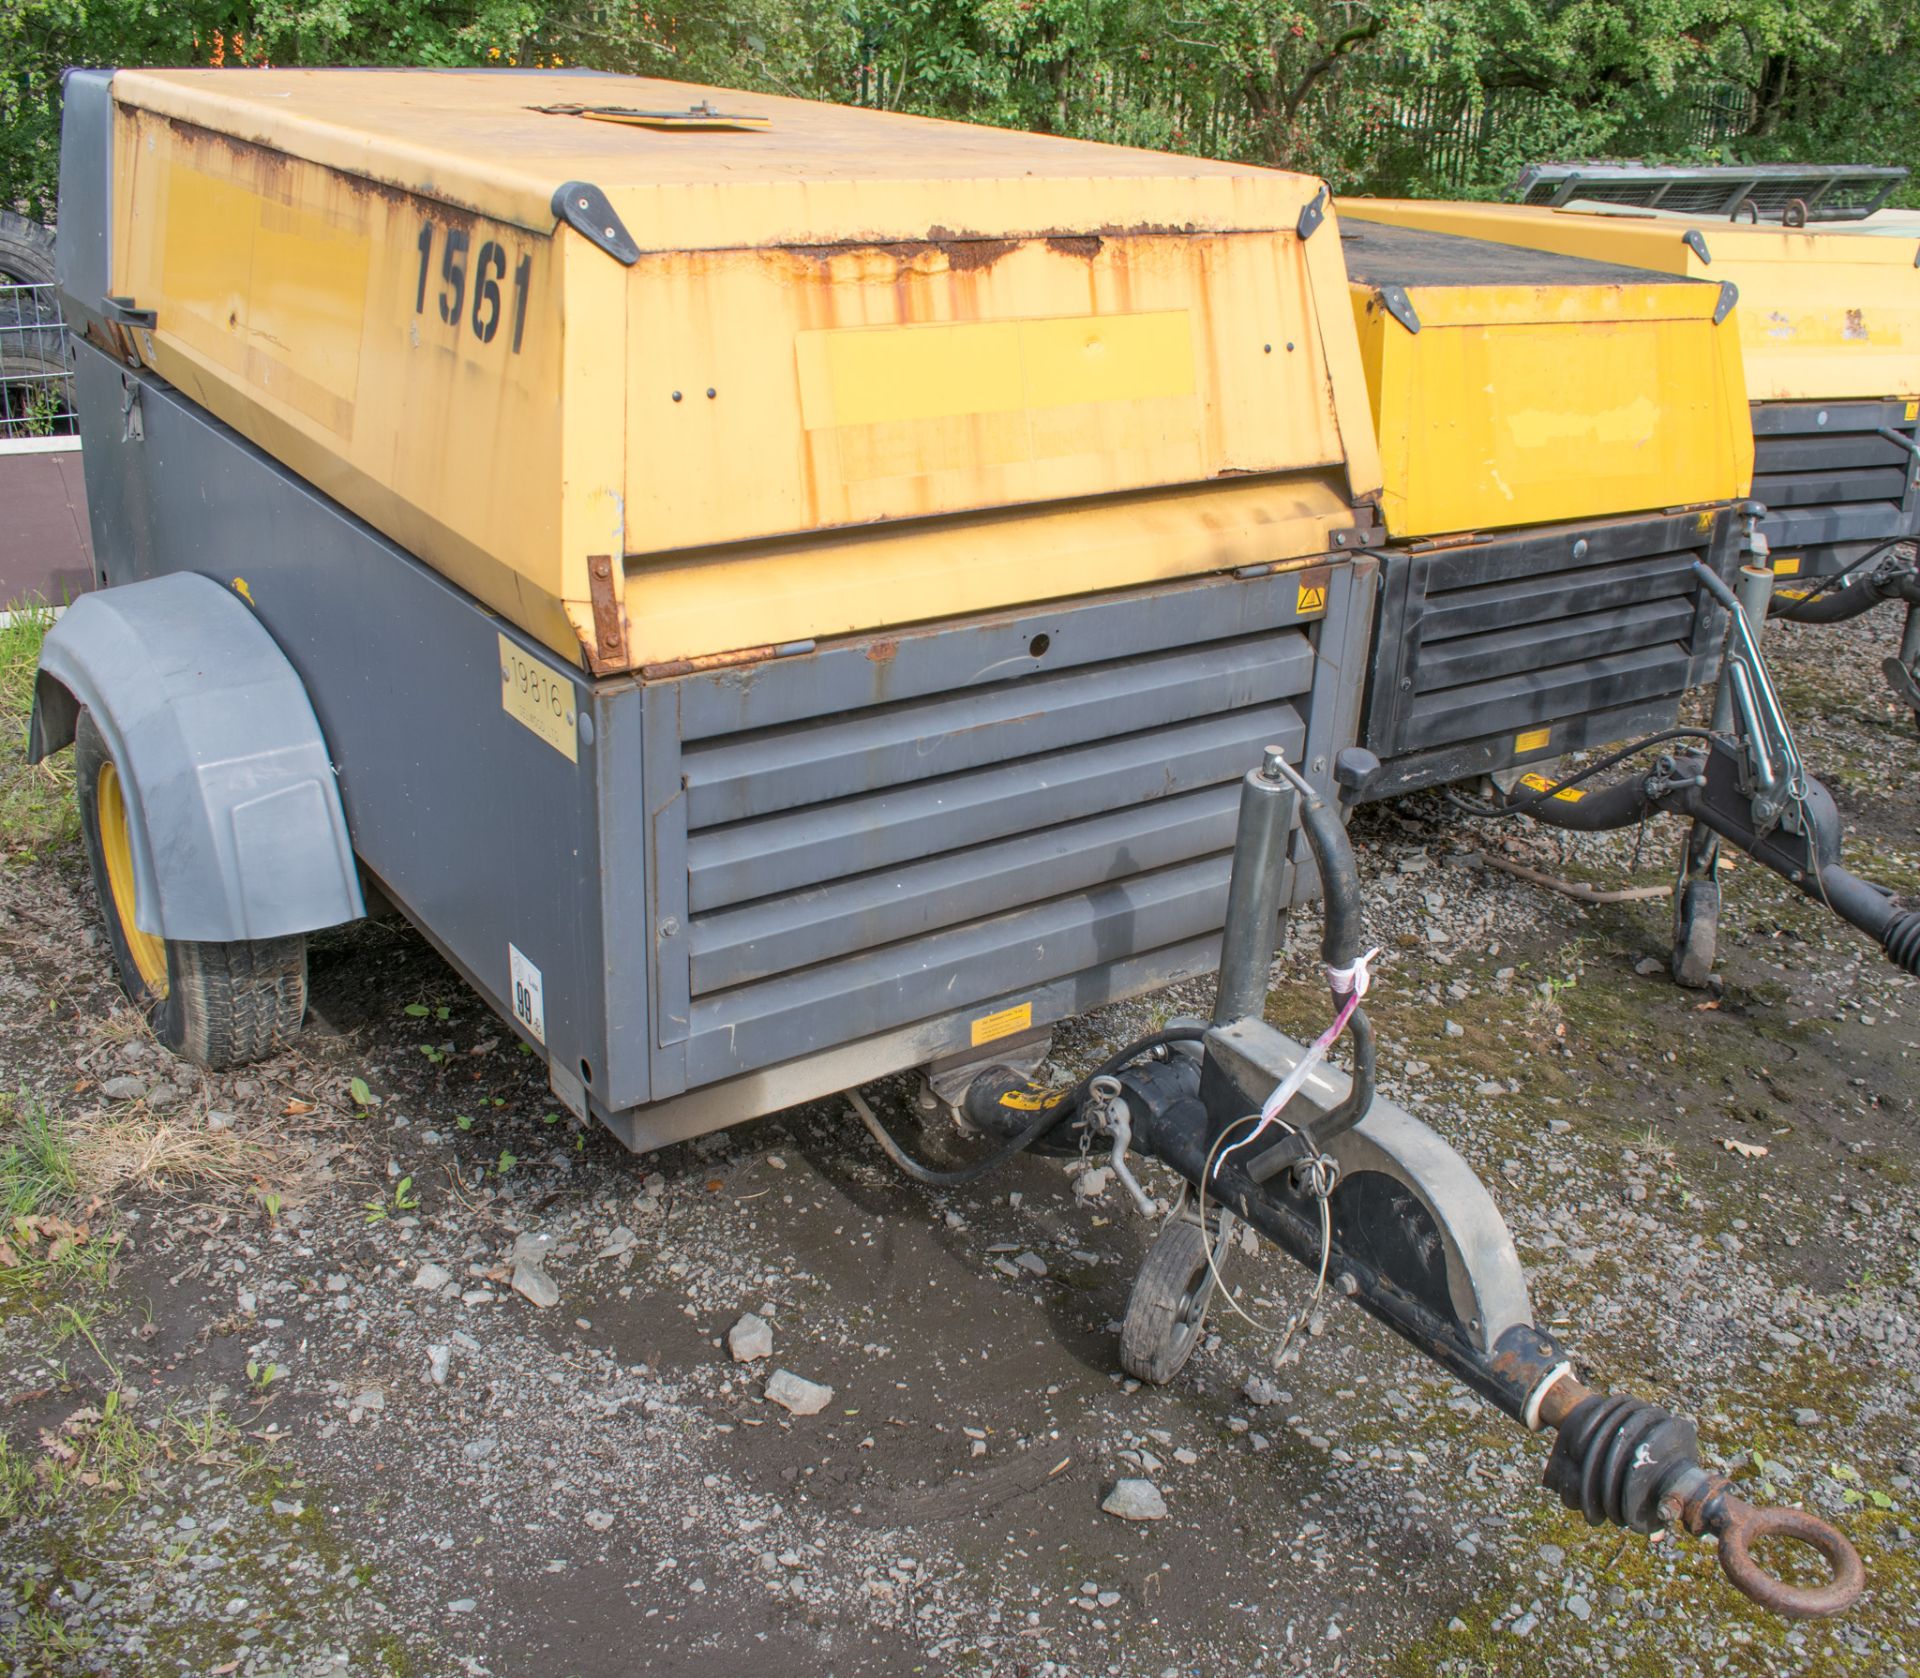 ATLAS COPCO XAS 137 diesel driven mobile air compressor Year: 2008 S/N: 703391 Recorded hours: